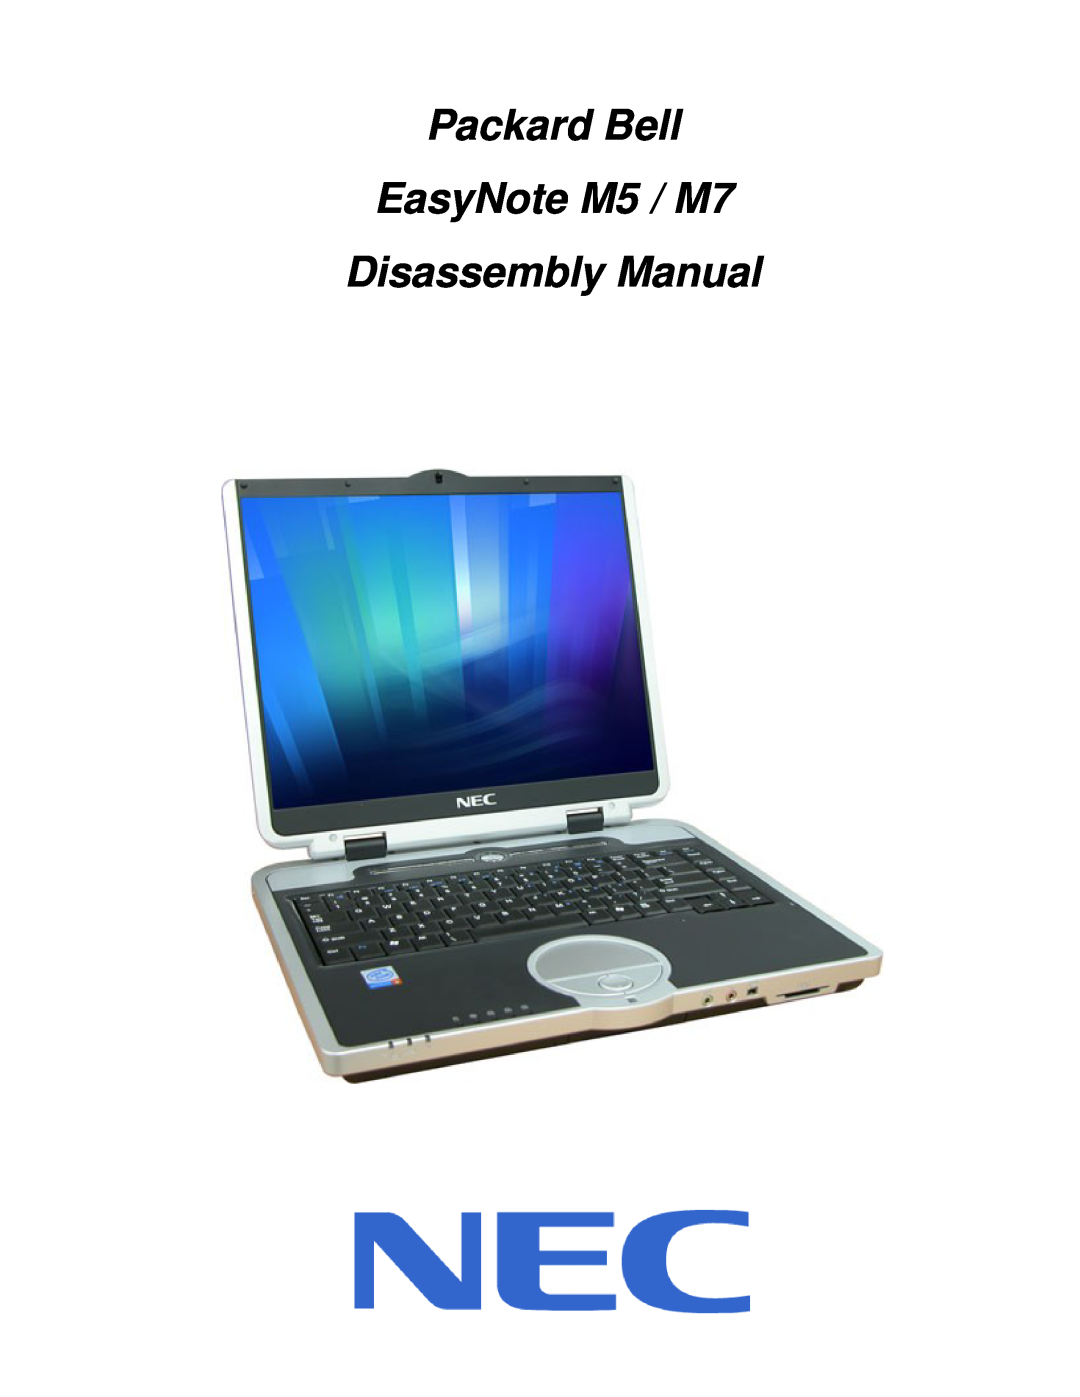 NEC manual Packard Bell EasyNote M5 / M7 Disassembly Manual 